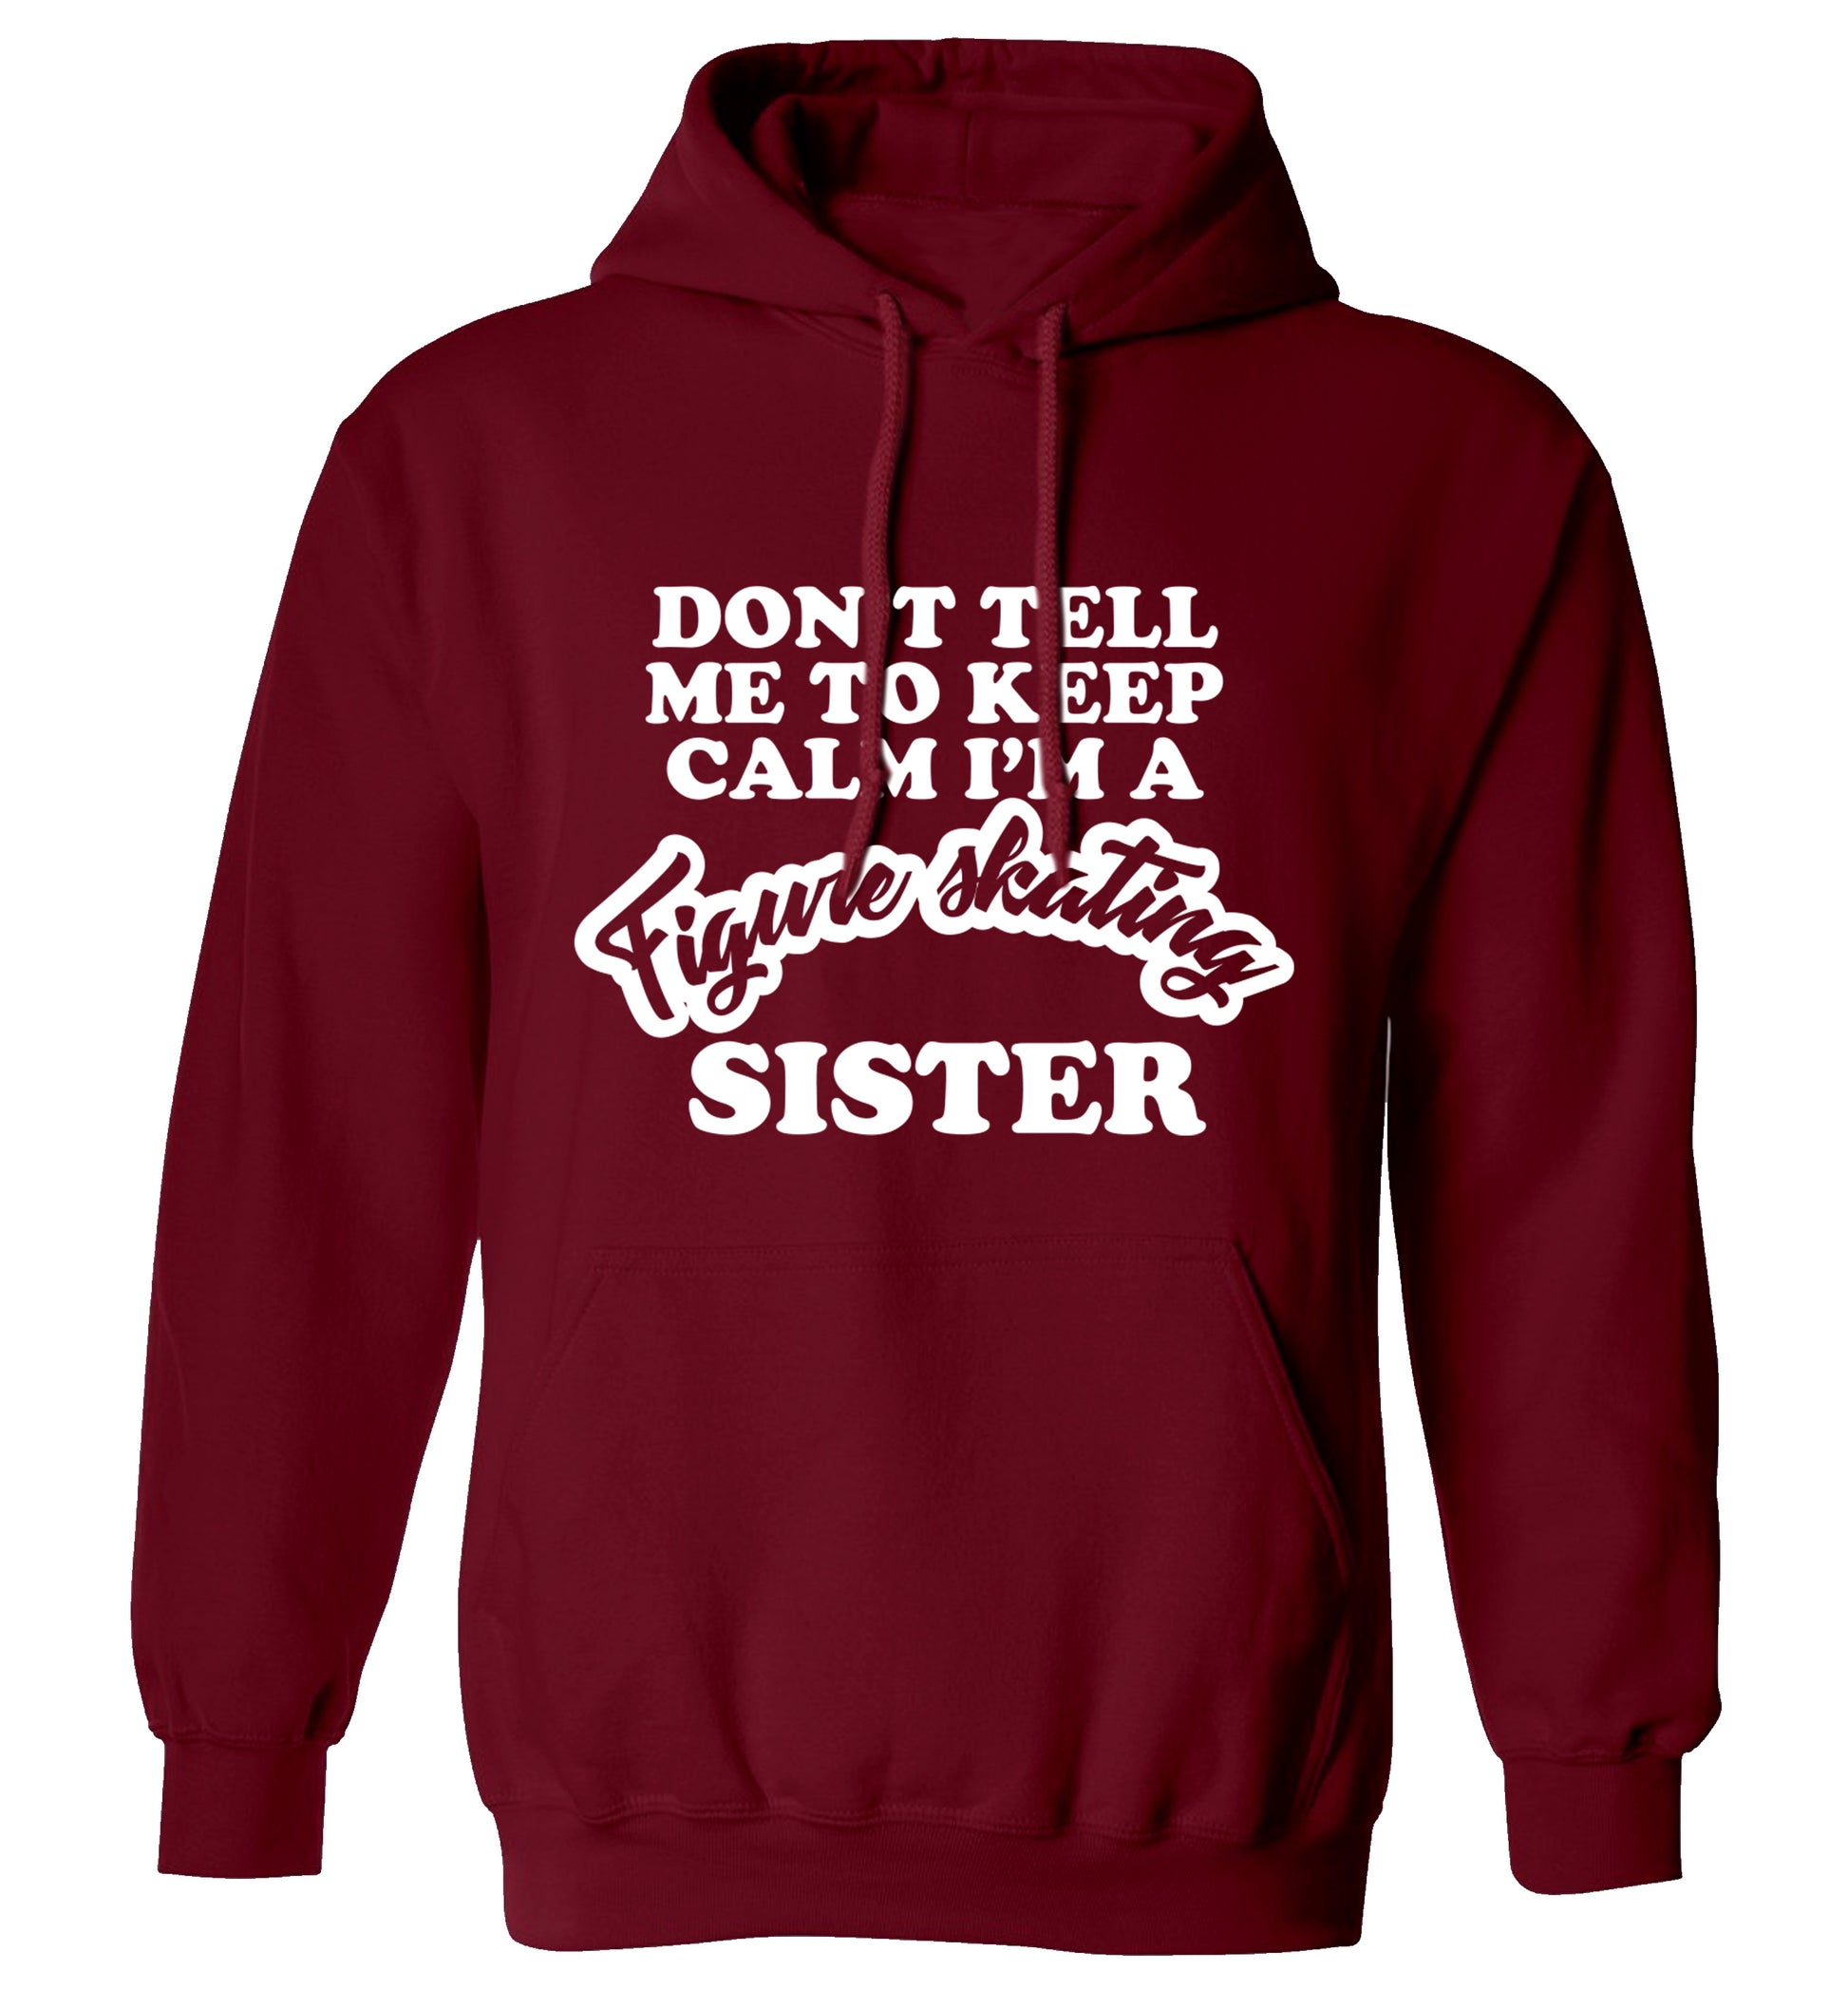 Don't tell me to keep calm I'm a figure skating sister adults unisexmaroon hoodie 2XL